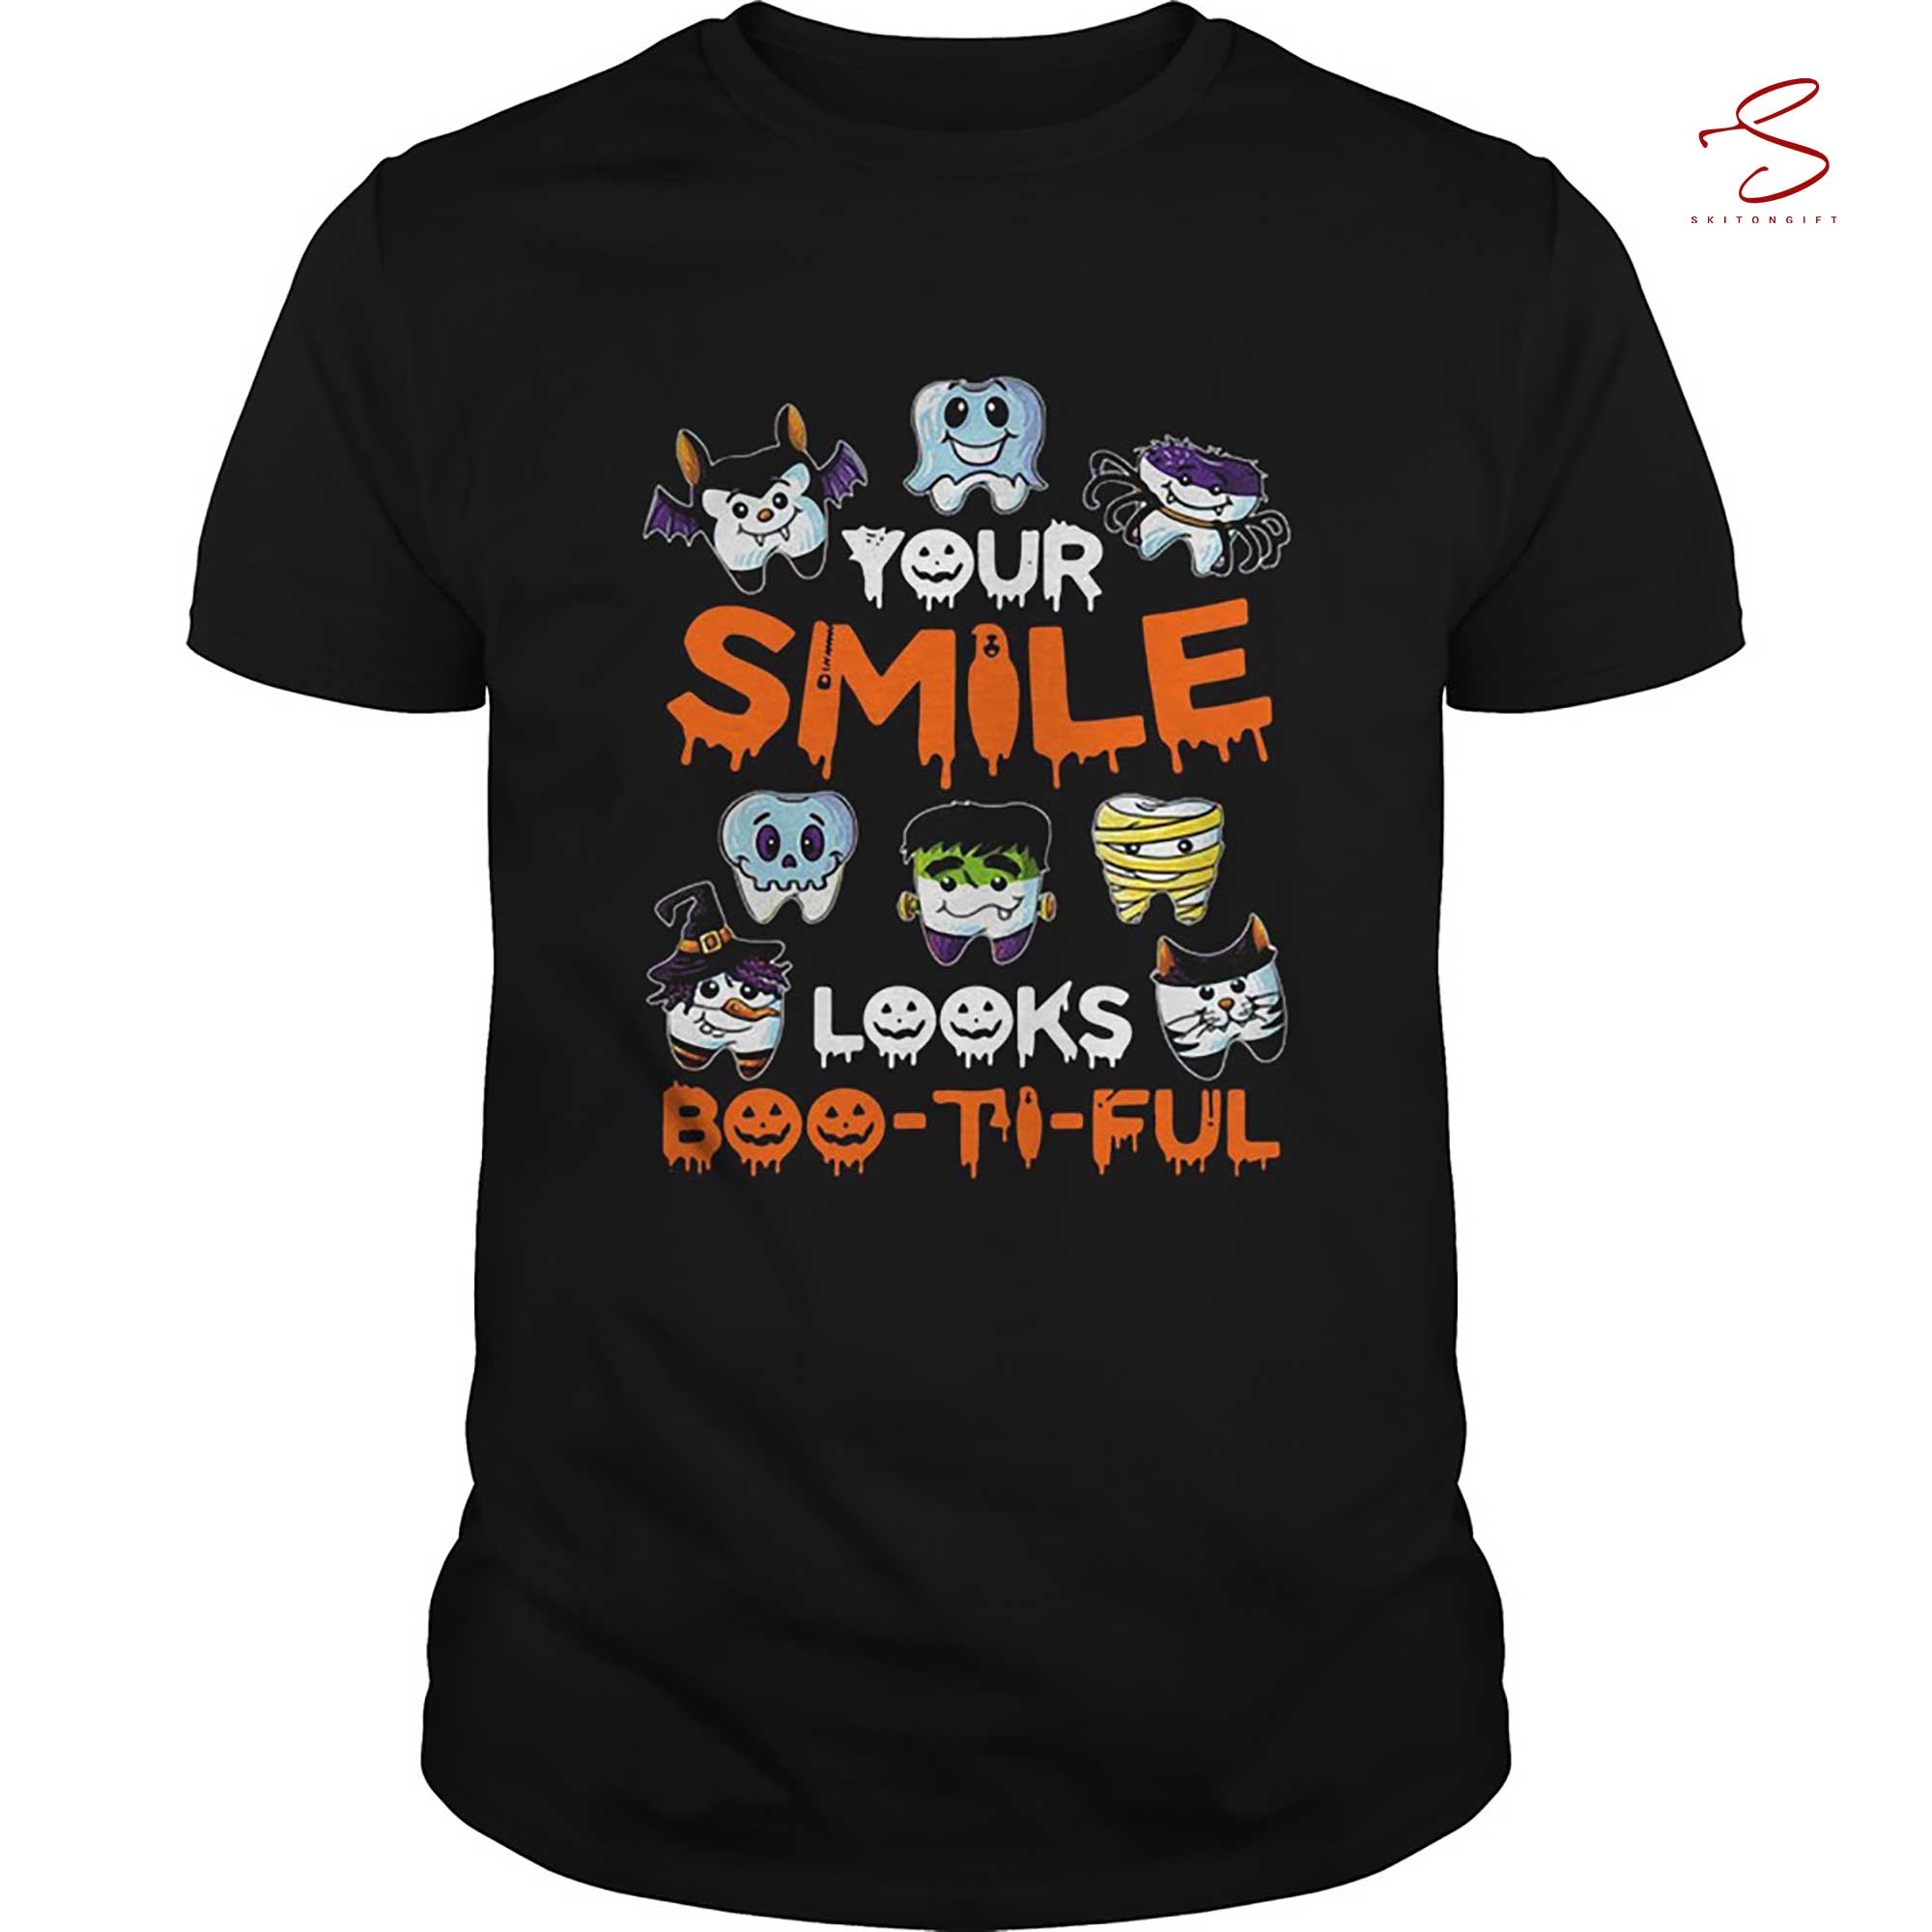 Skitongift You Smile Looks Bootiful Halloween Funny Shirt, gifts for Dad Mom,Gifts for Him, Her, Gifts for Dad Mom